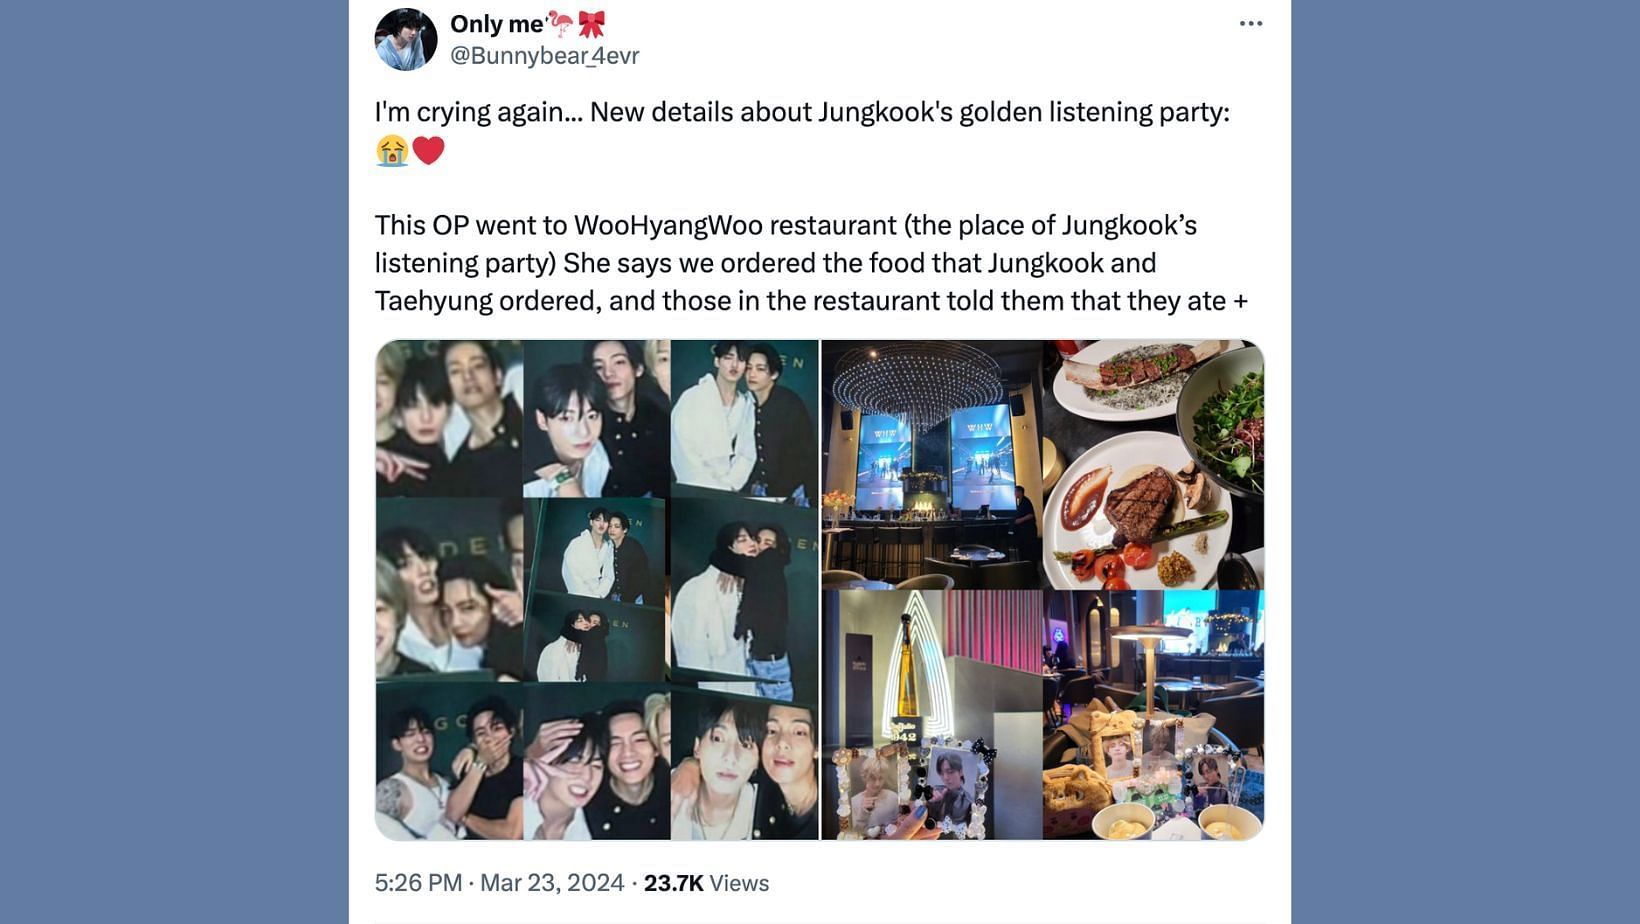 Fan shares exclusive details of Jungkook&#039;s GOLDEN Listening Party. (Image via X/@Bunnybear_4evr)